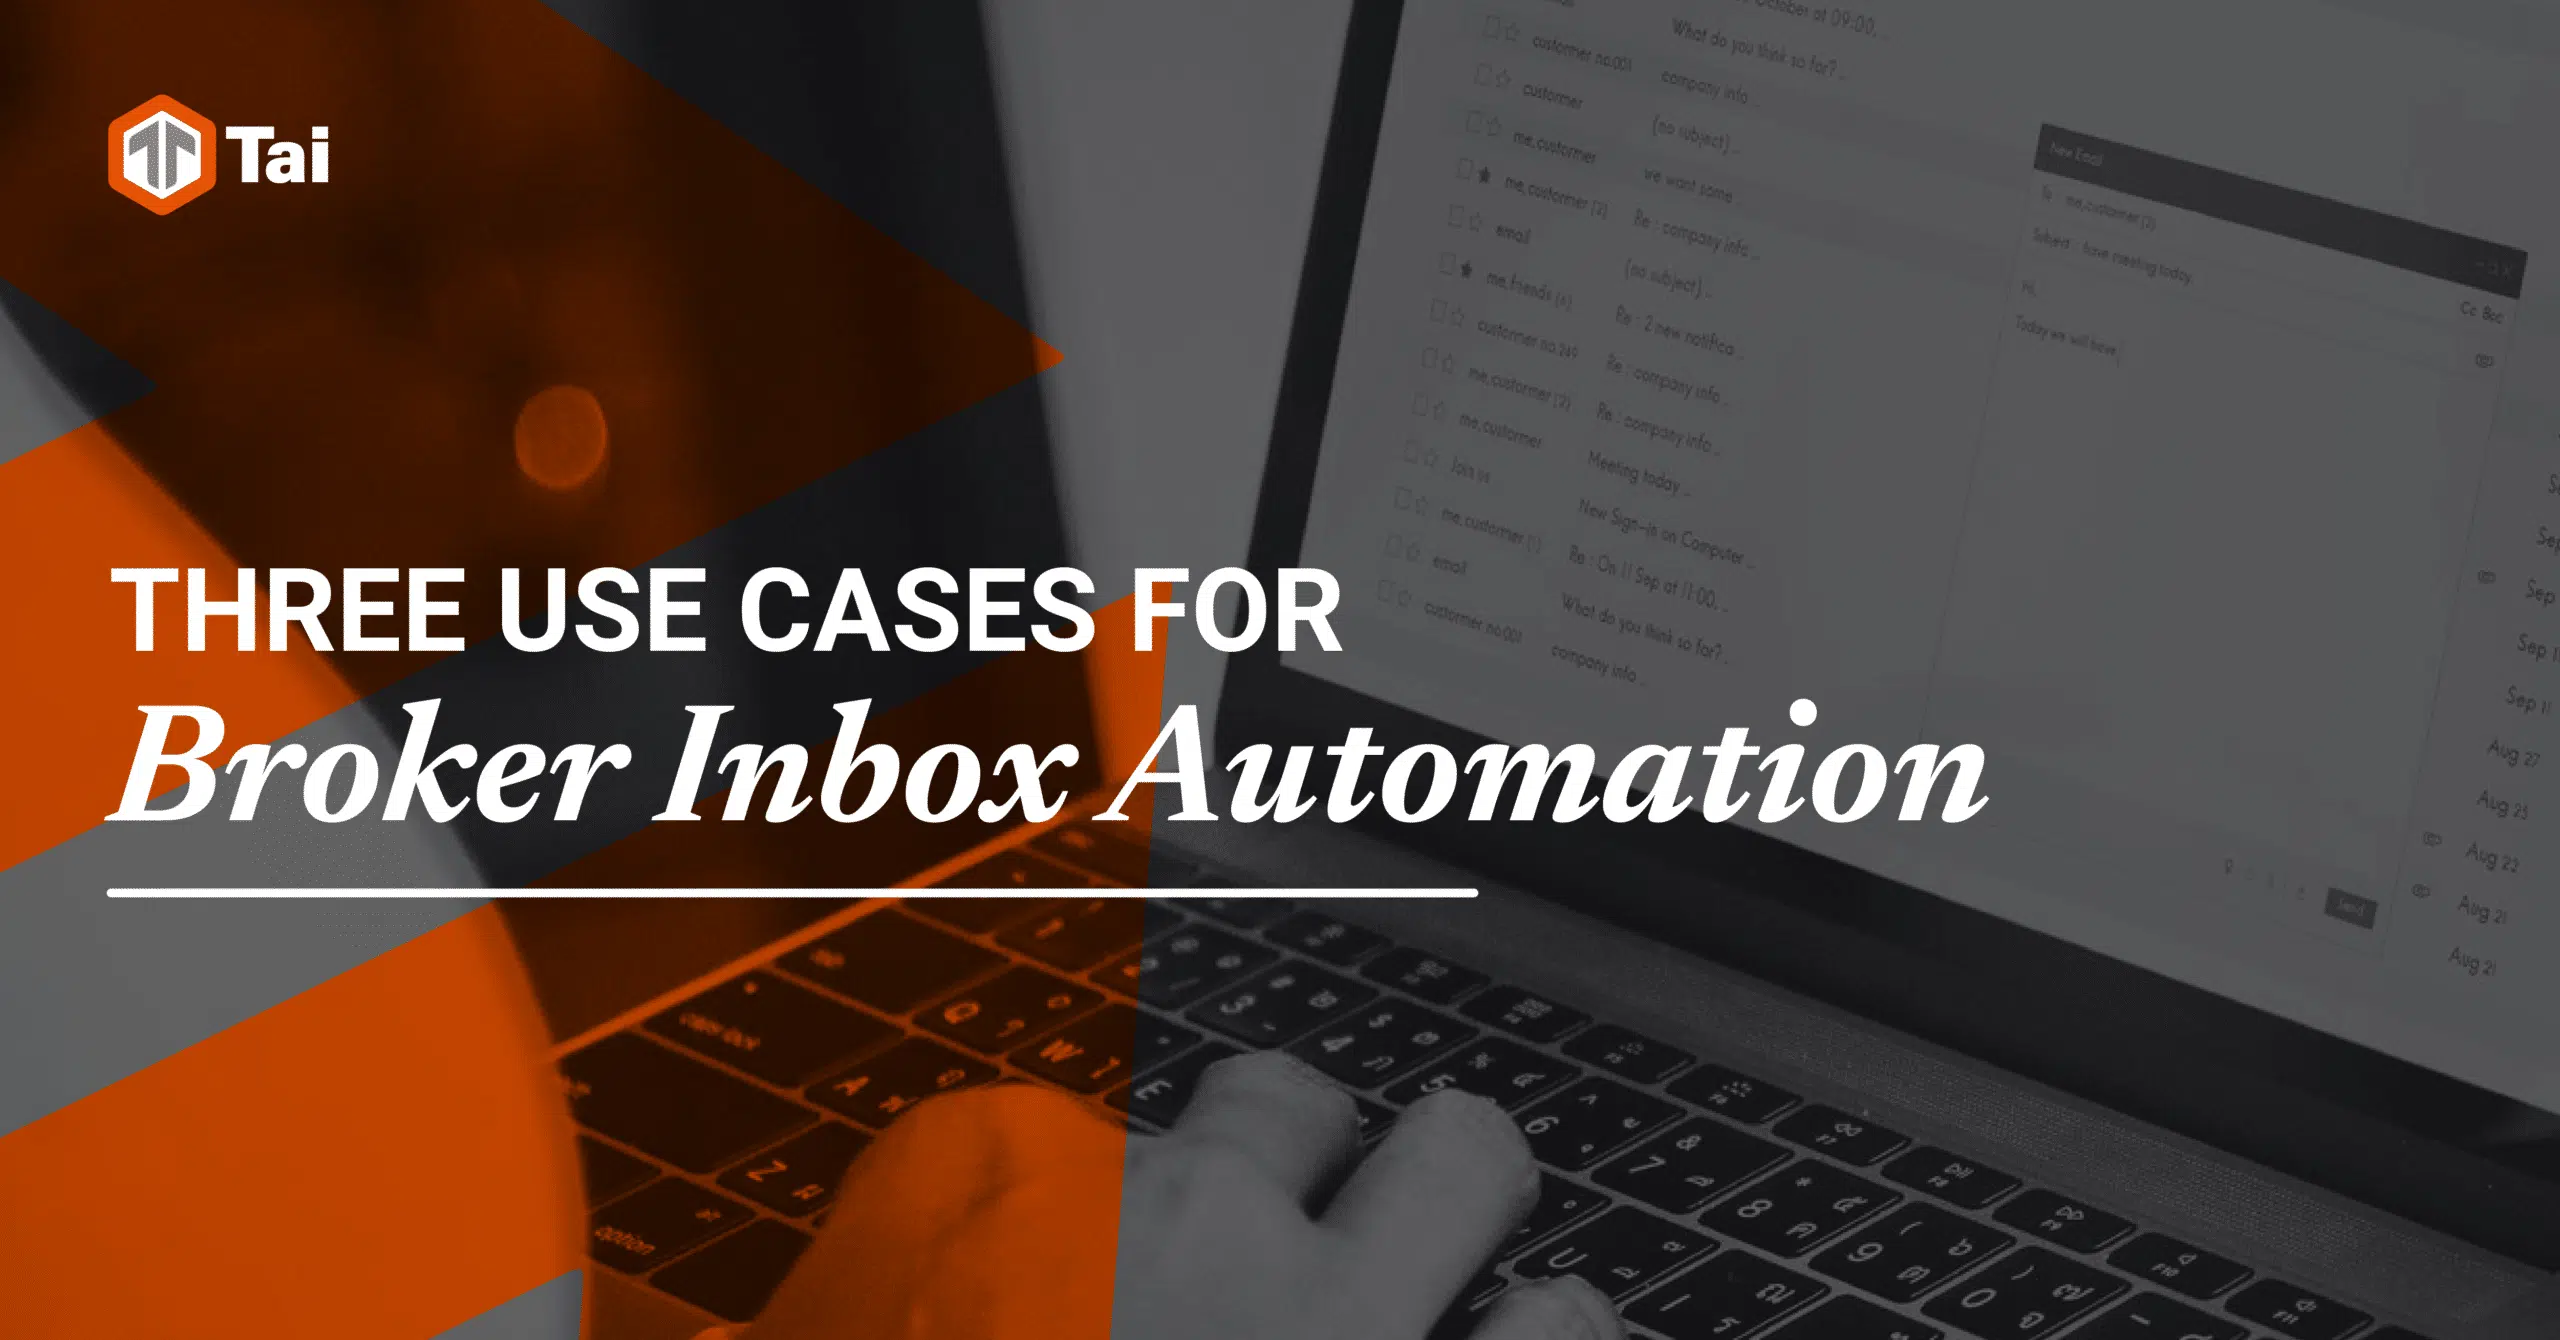 Three Life-Altering Impacts for the Freight Broker Who Adopts Inbox Automation